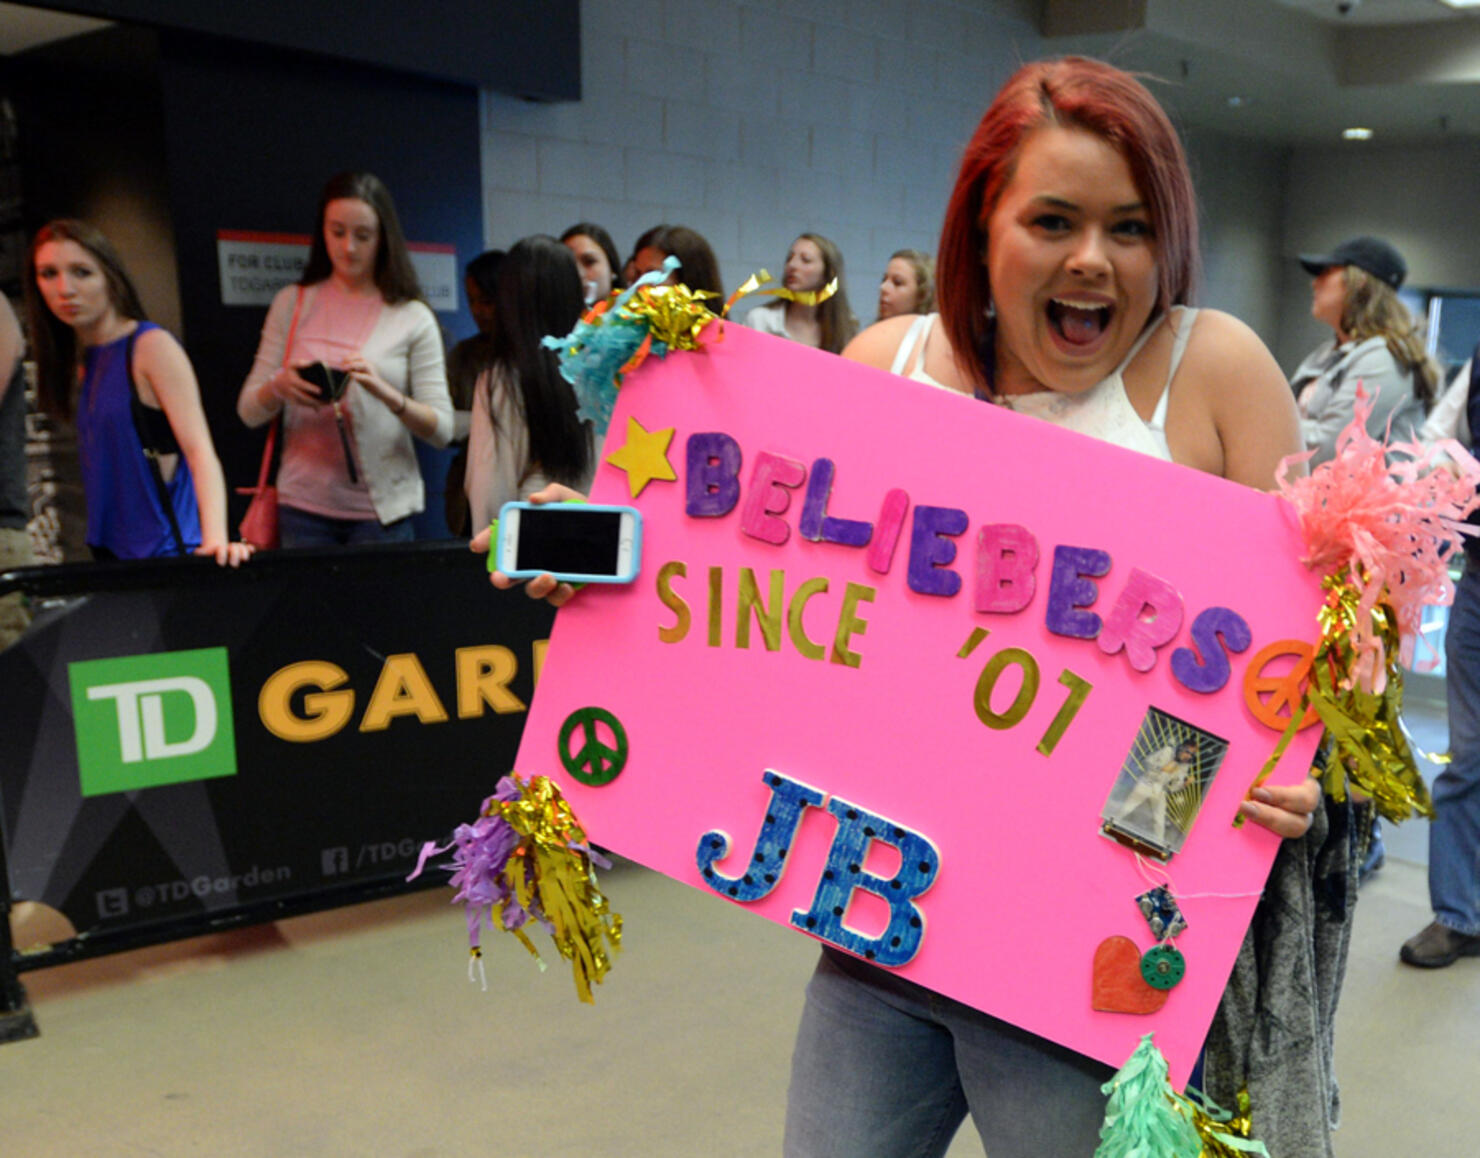 (Boston, MA, 05/10/16) A Justin Bieber fans is seen outside TD Garden in Boston on Tuesday, May 10, 2016. Staff photo by Christopher Evans